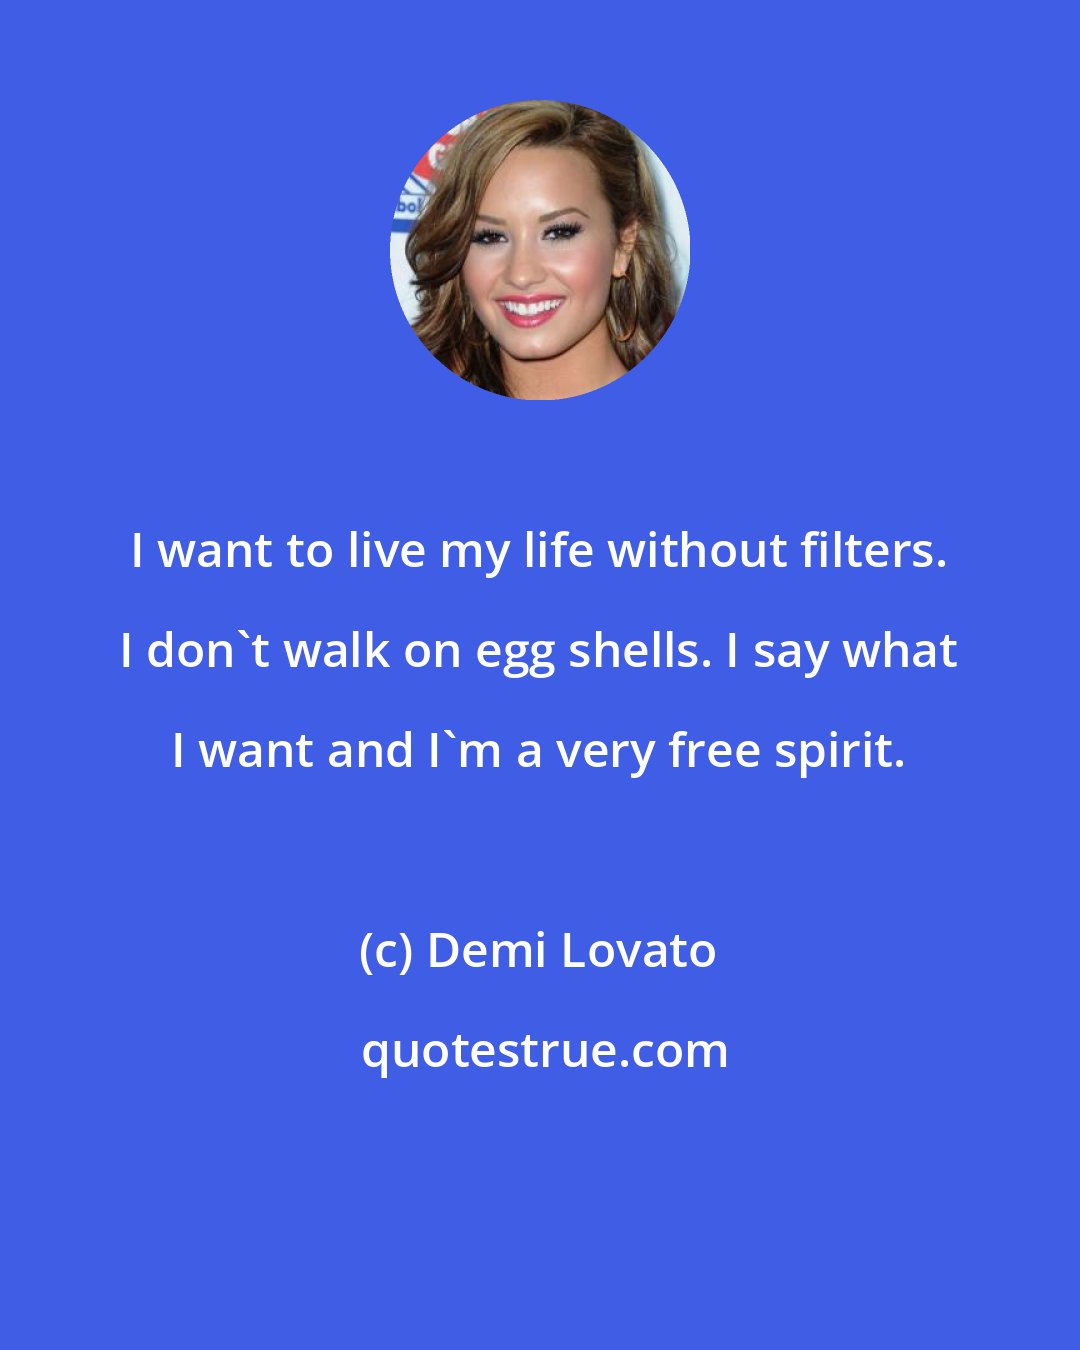 Demi Lovato: I want to live my life without filters. I don't walk on egg shells. I say what I want and I'm a very free spirit.